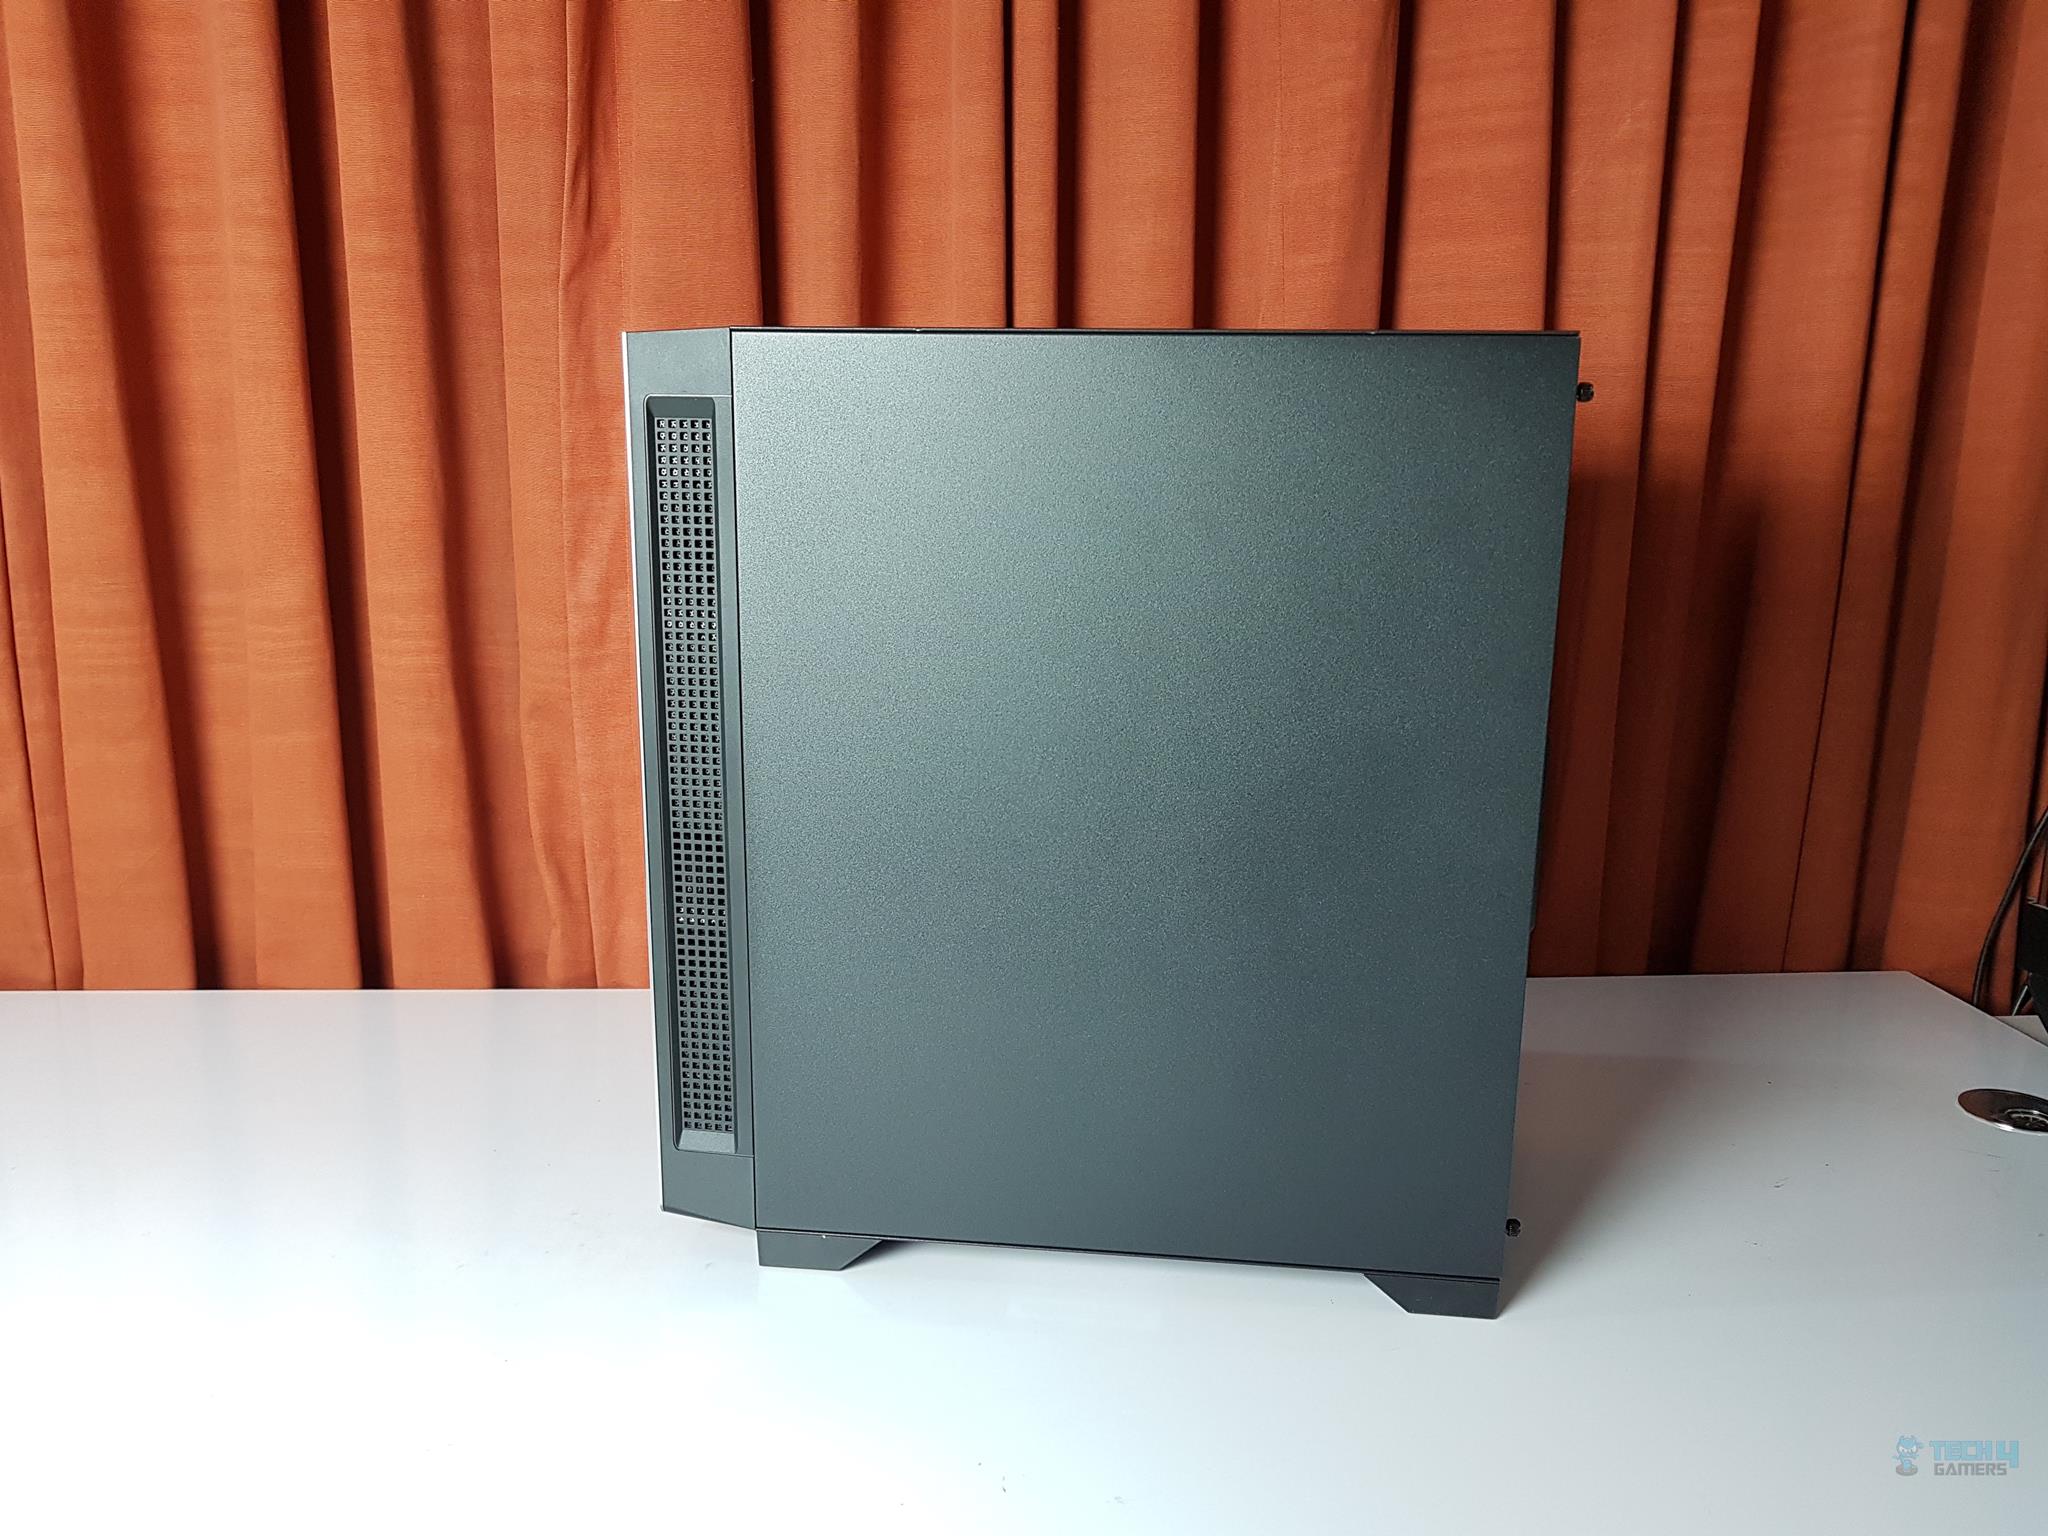 hw h550 right side panel